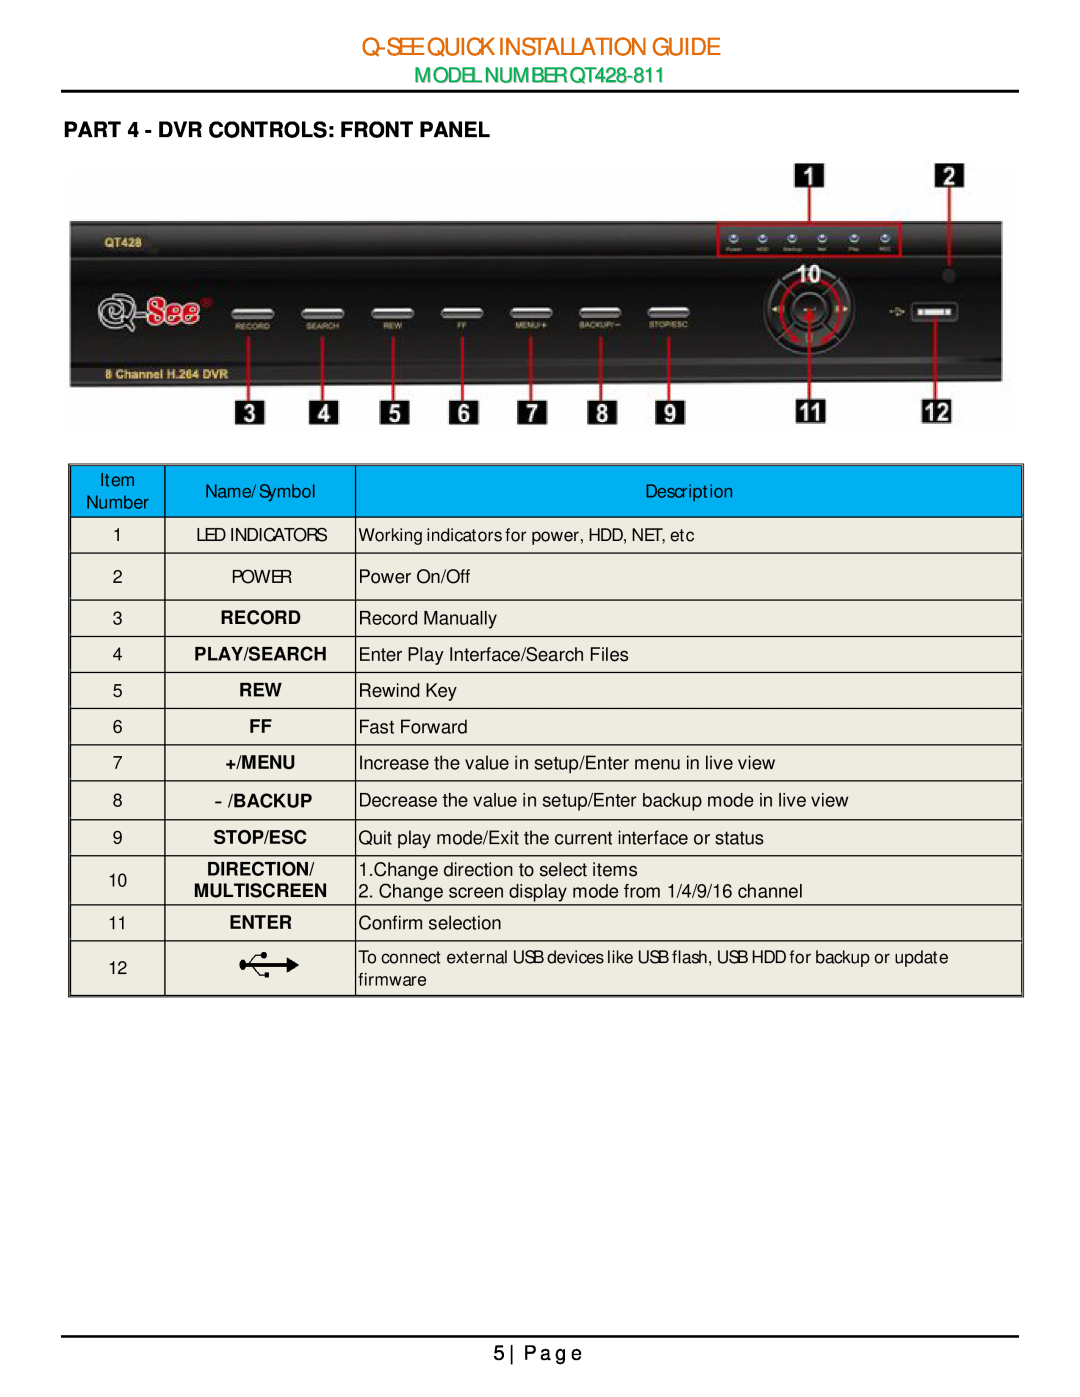 Q-See manual PART 4 - DVR CONTROLS FRONT PANEL, P a g e, Q-See Quick Installation Guide, MODEL NUMBER QT428-811 